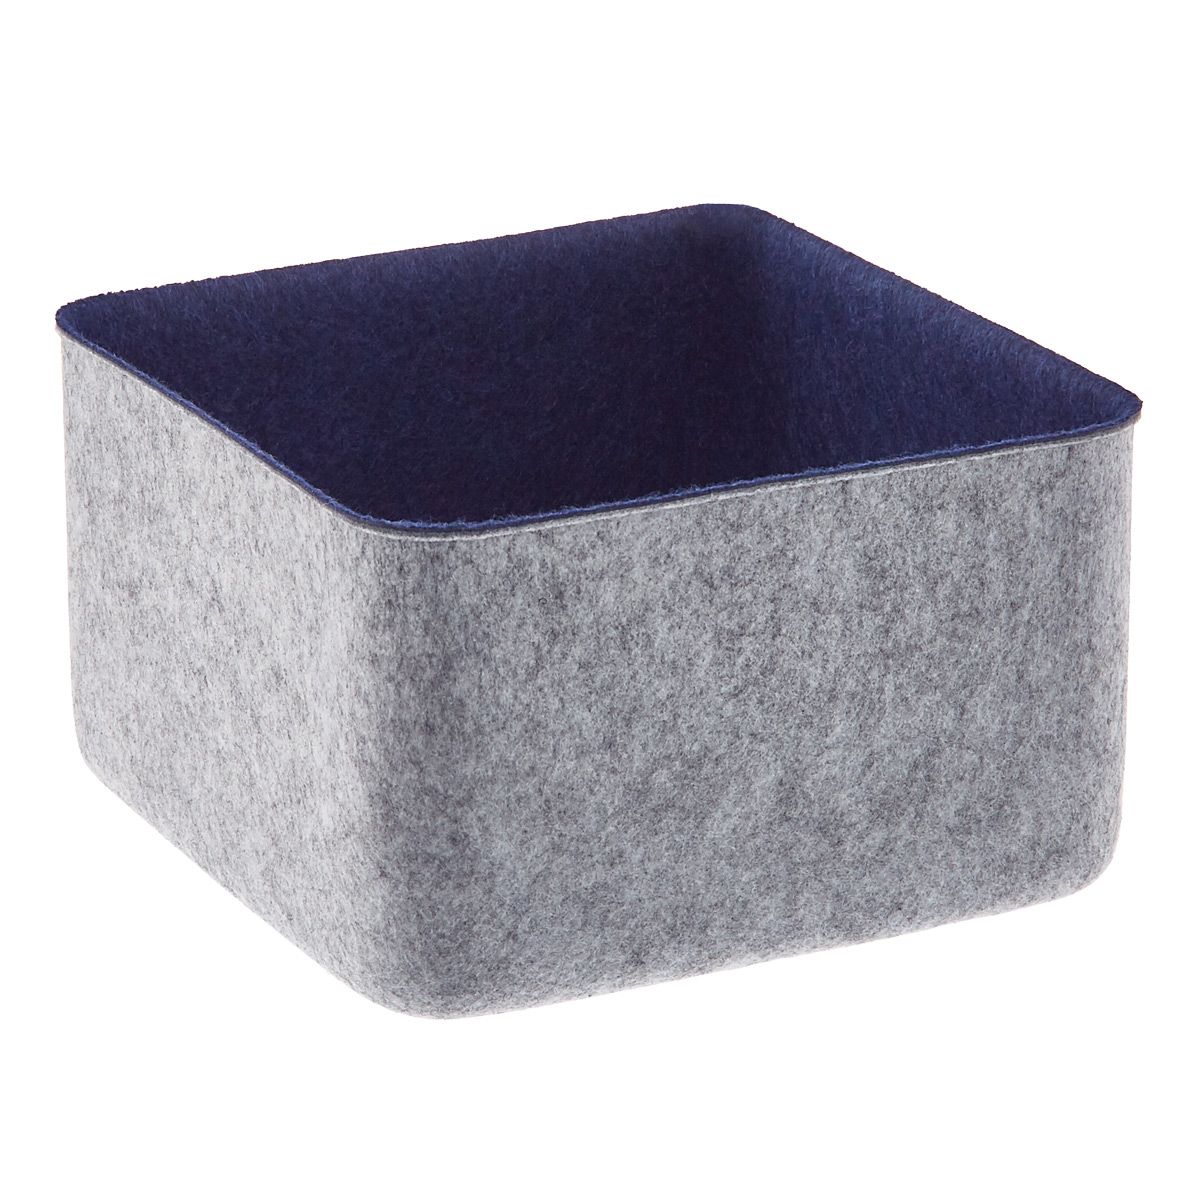 Three by Three Felt Drawer Organizers | The Container Store